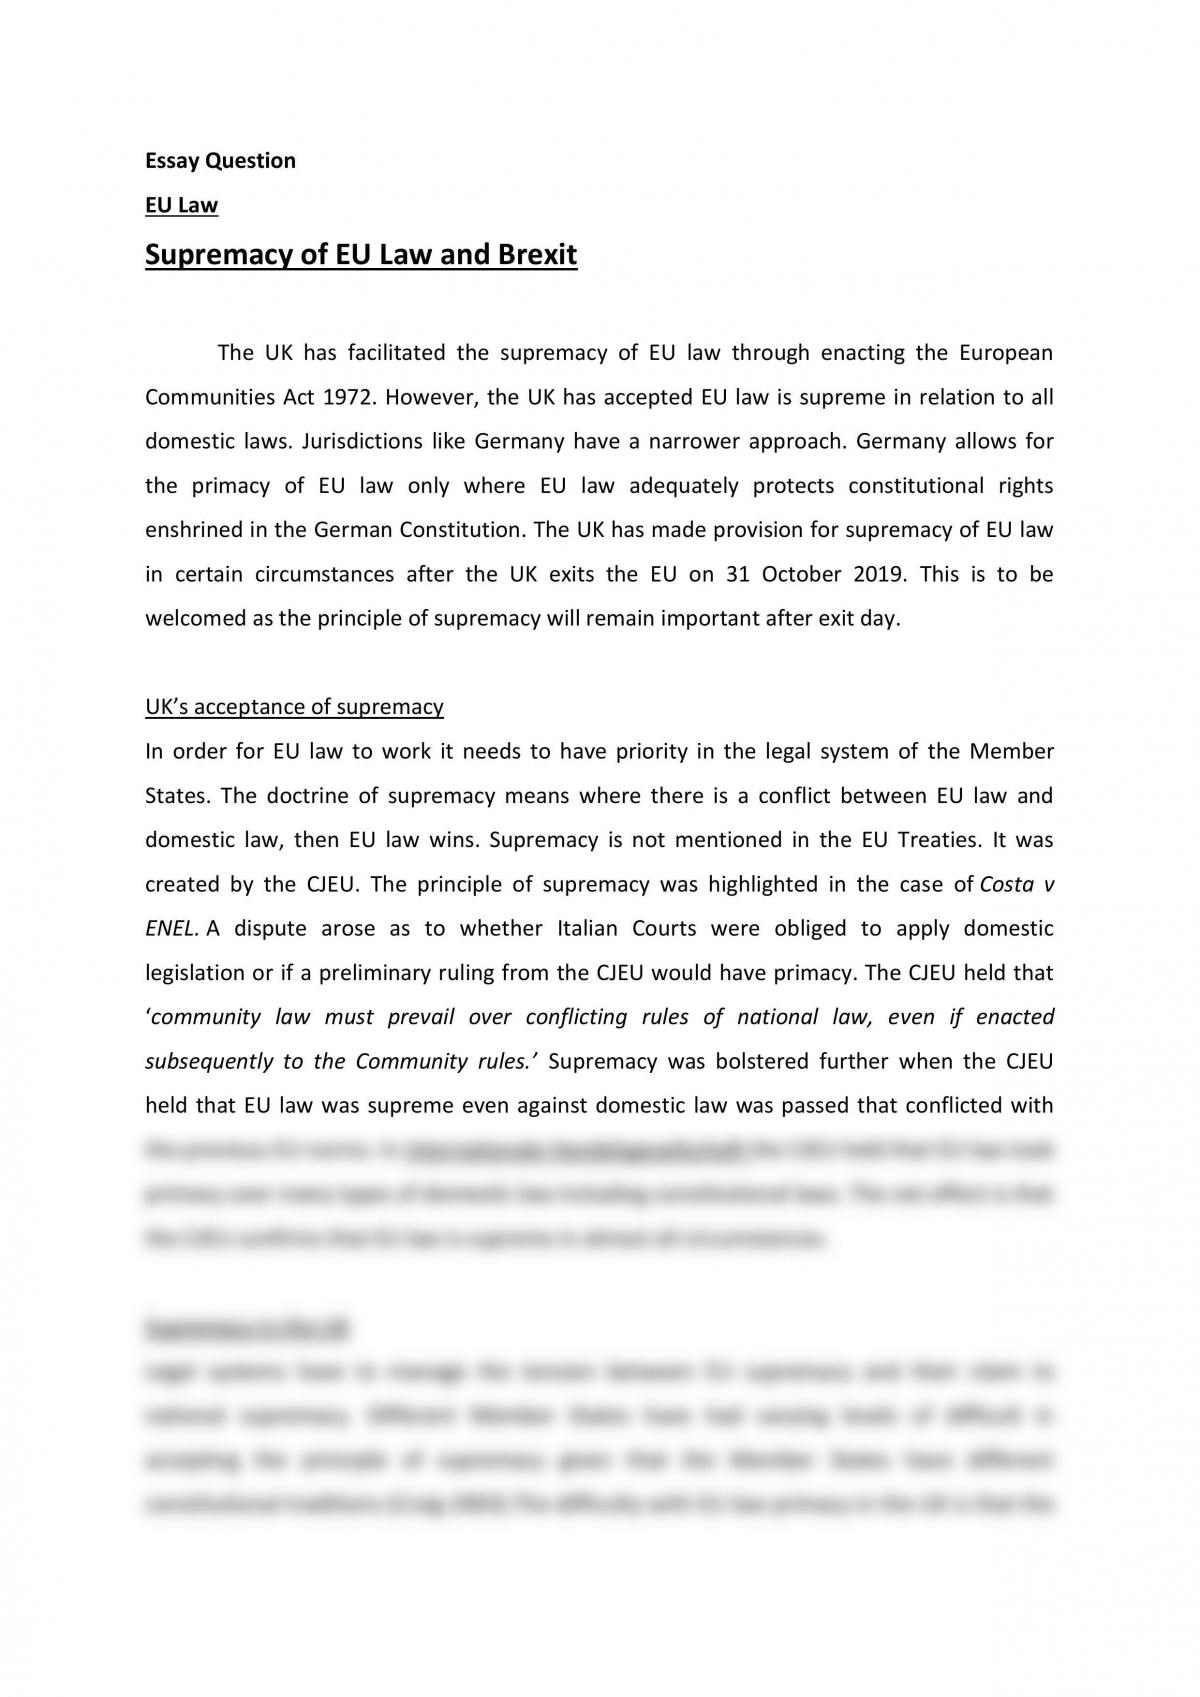 Supremacy of EU Law and Brexit - Page 1